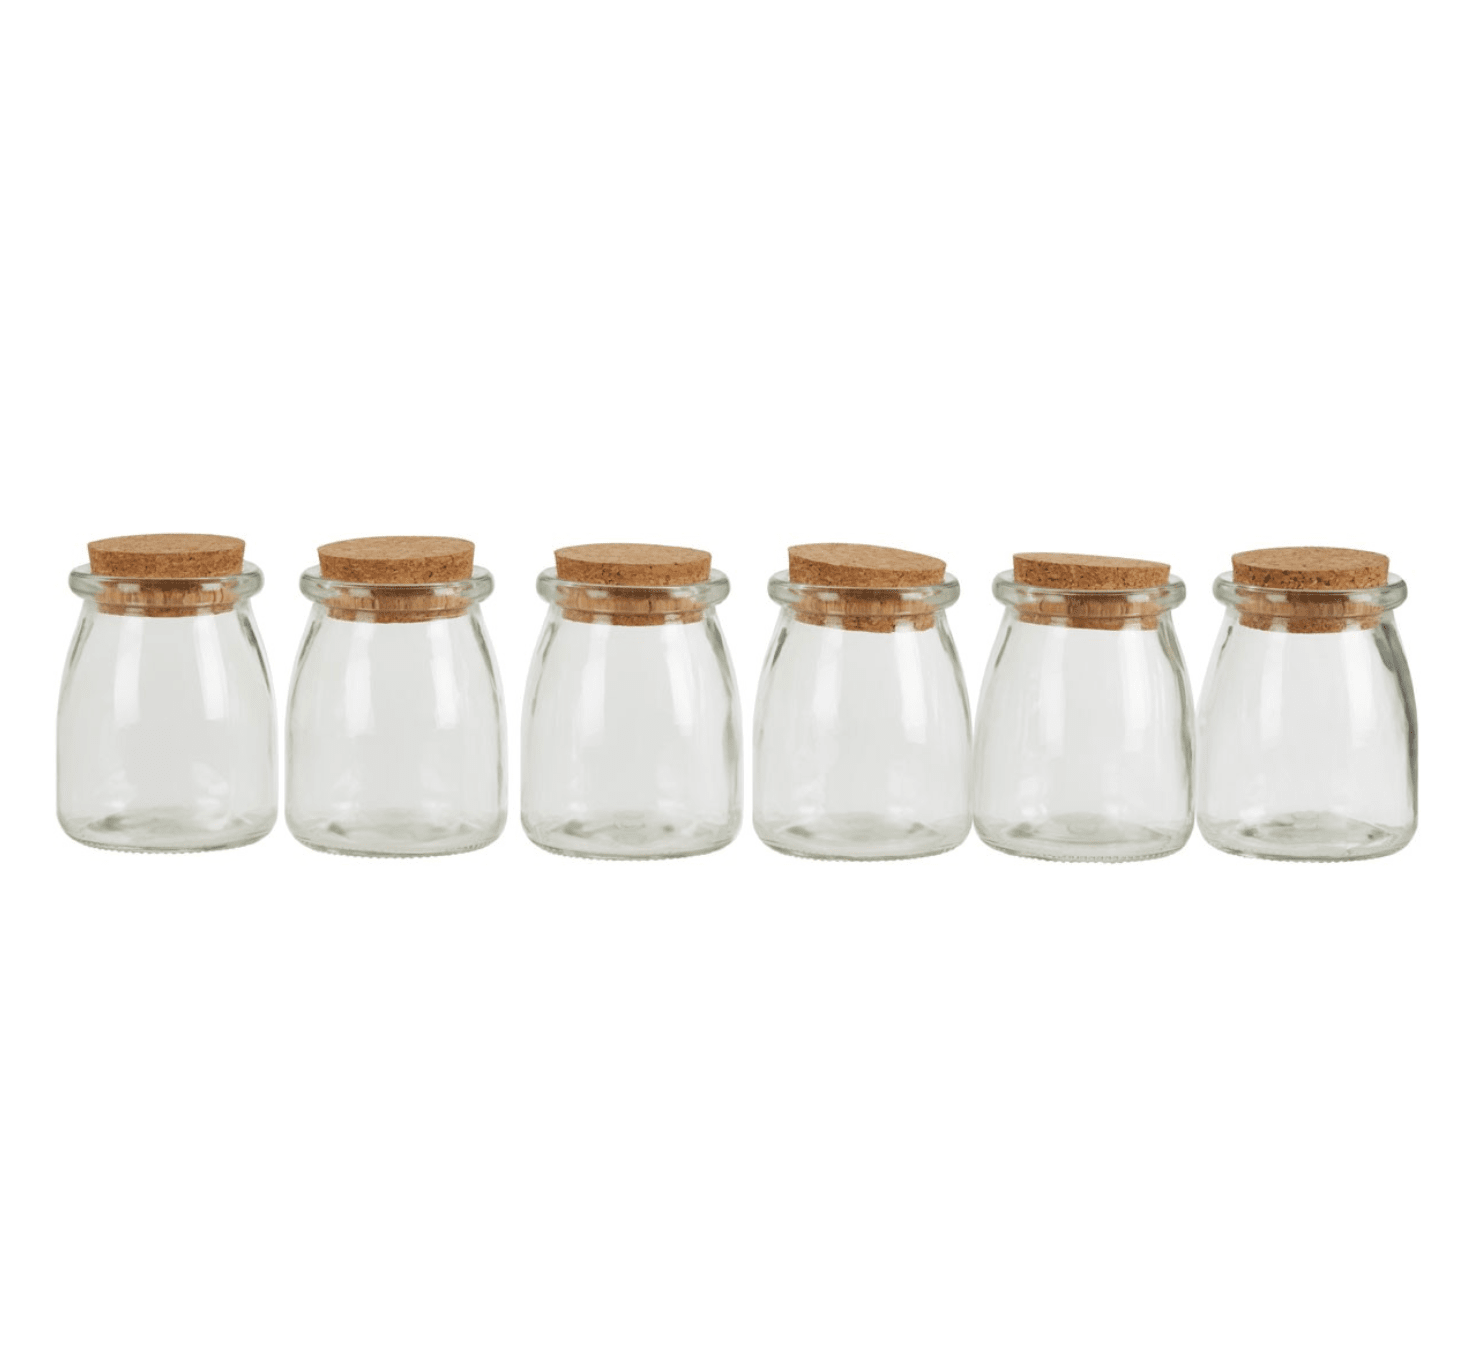 Set of Large Round Glass Jars with Cork Stoppers